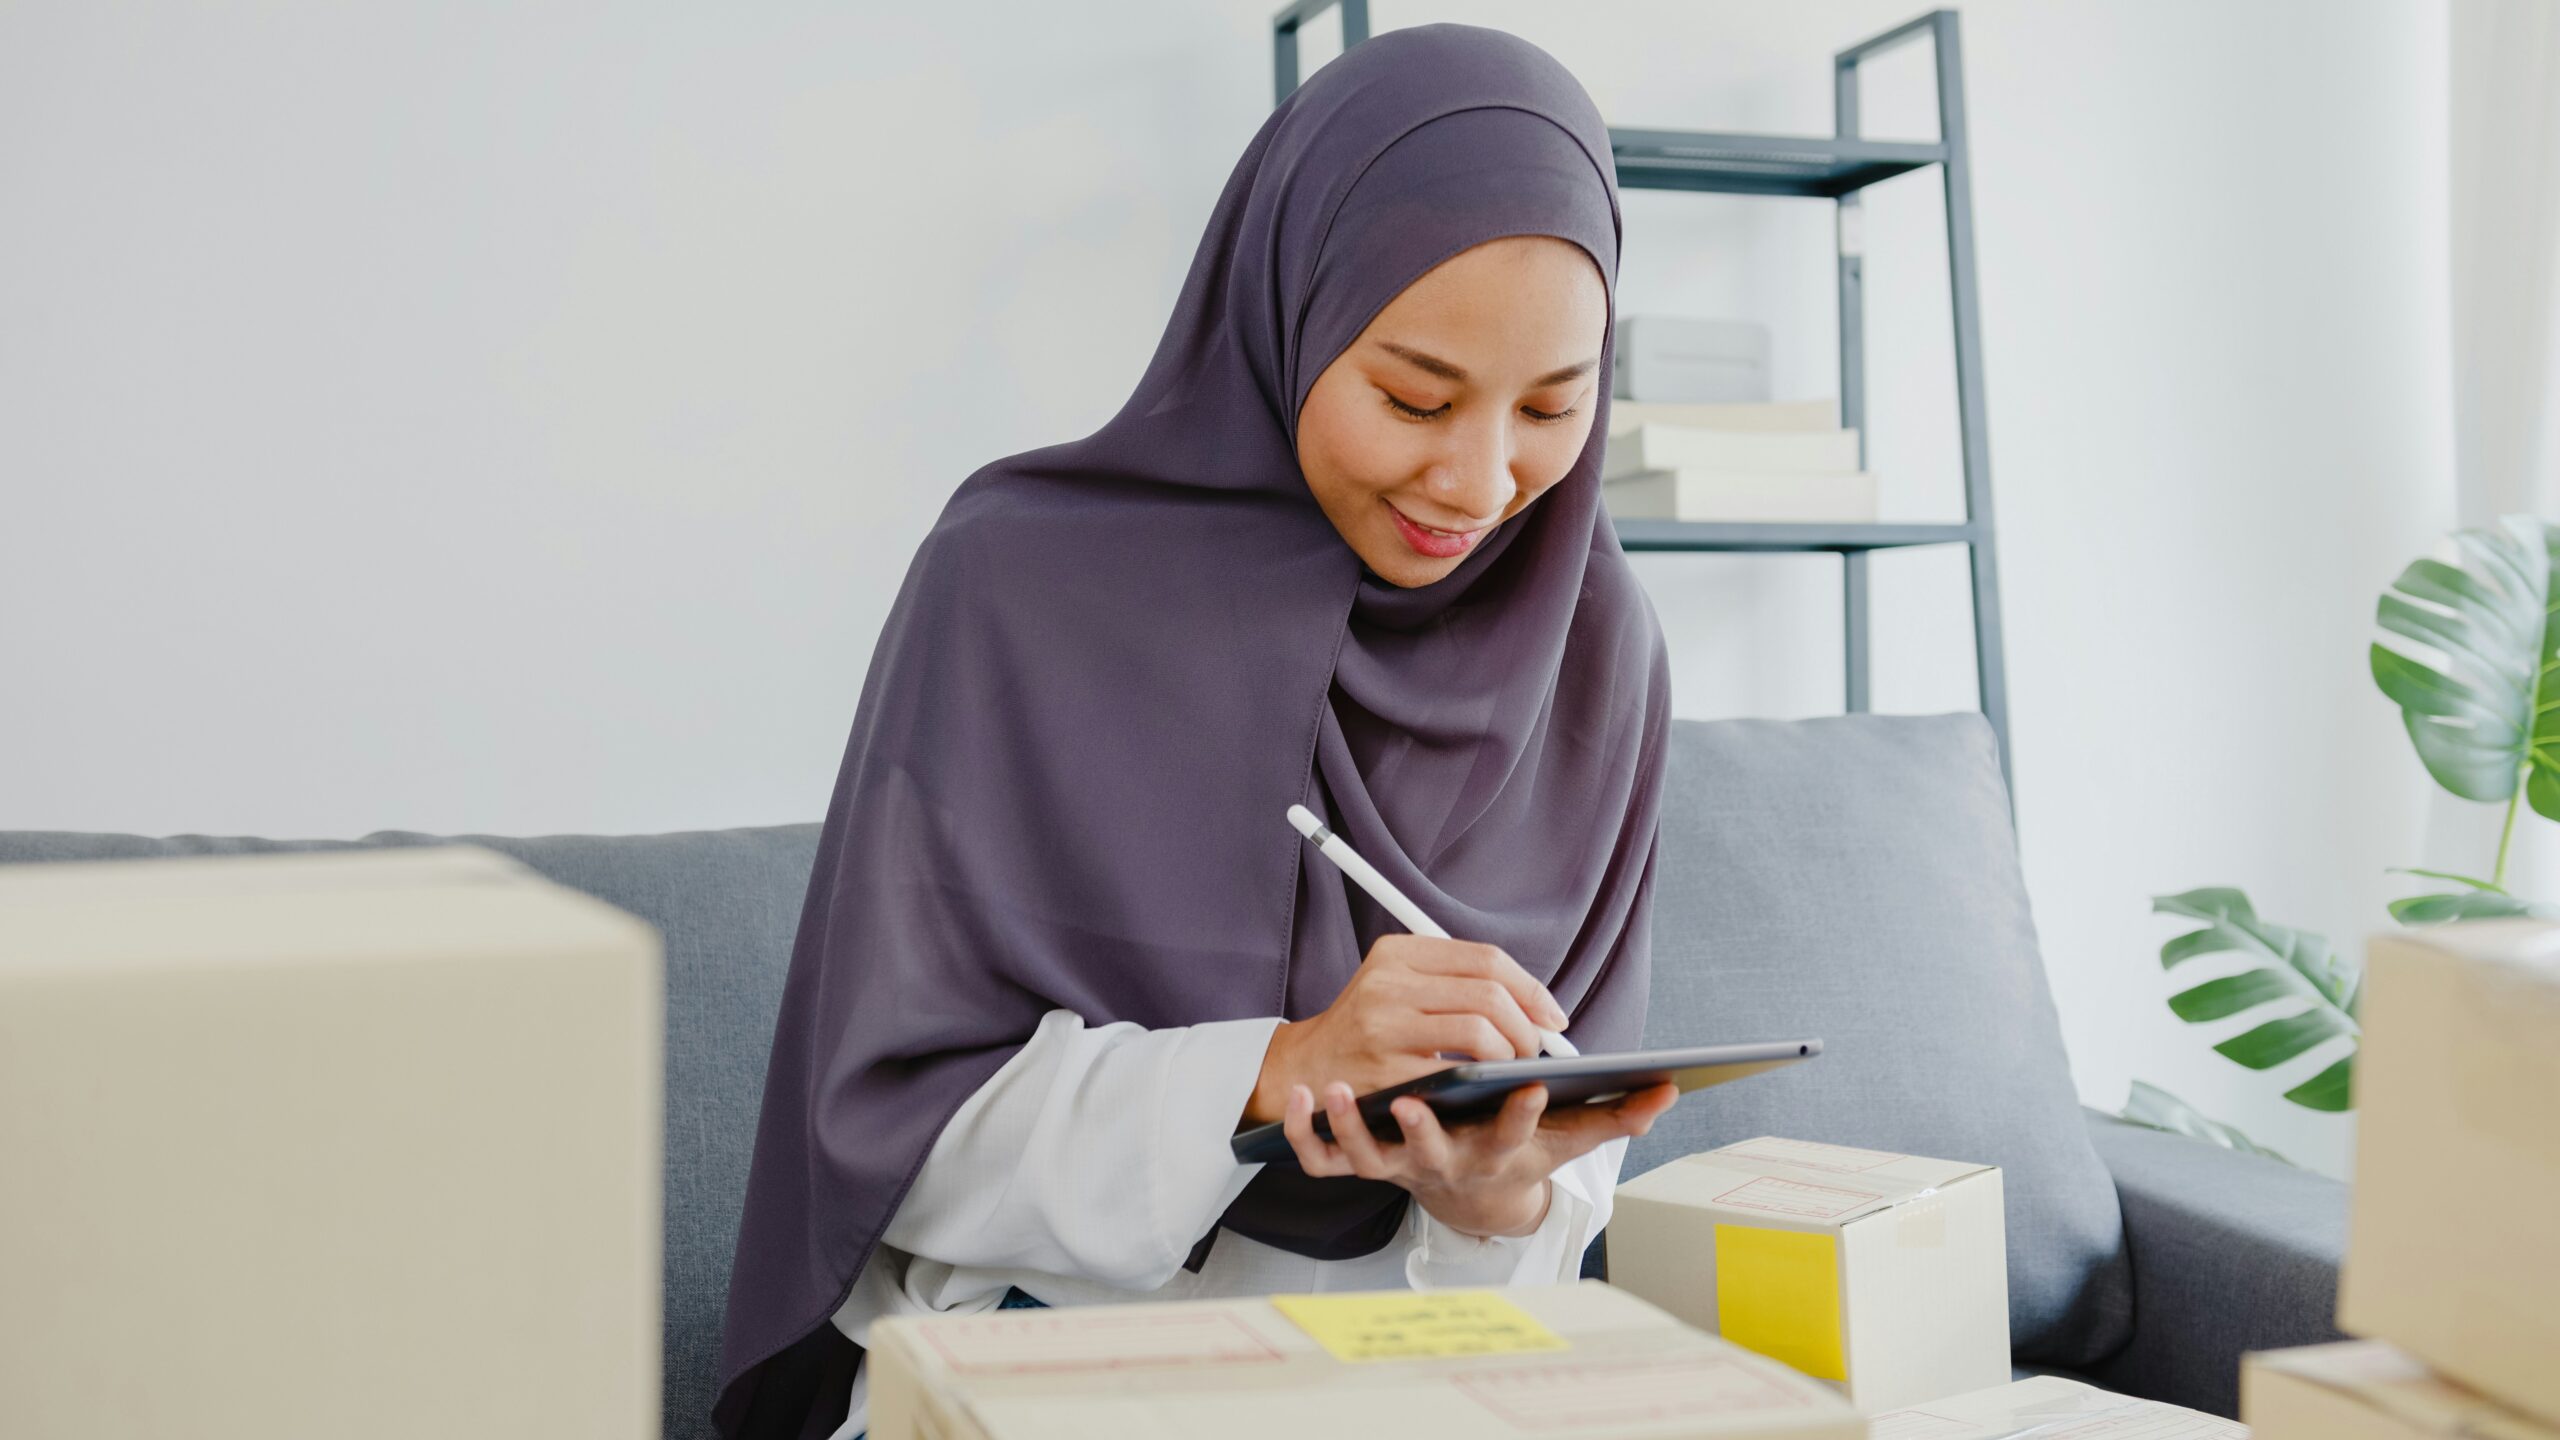 A woman in a hijab using a digital tablet and stylus while sitting on a sofa surrounded by packages and office supplies, researching what does an IT strategy consultant do.